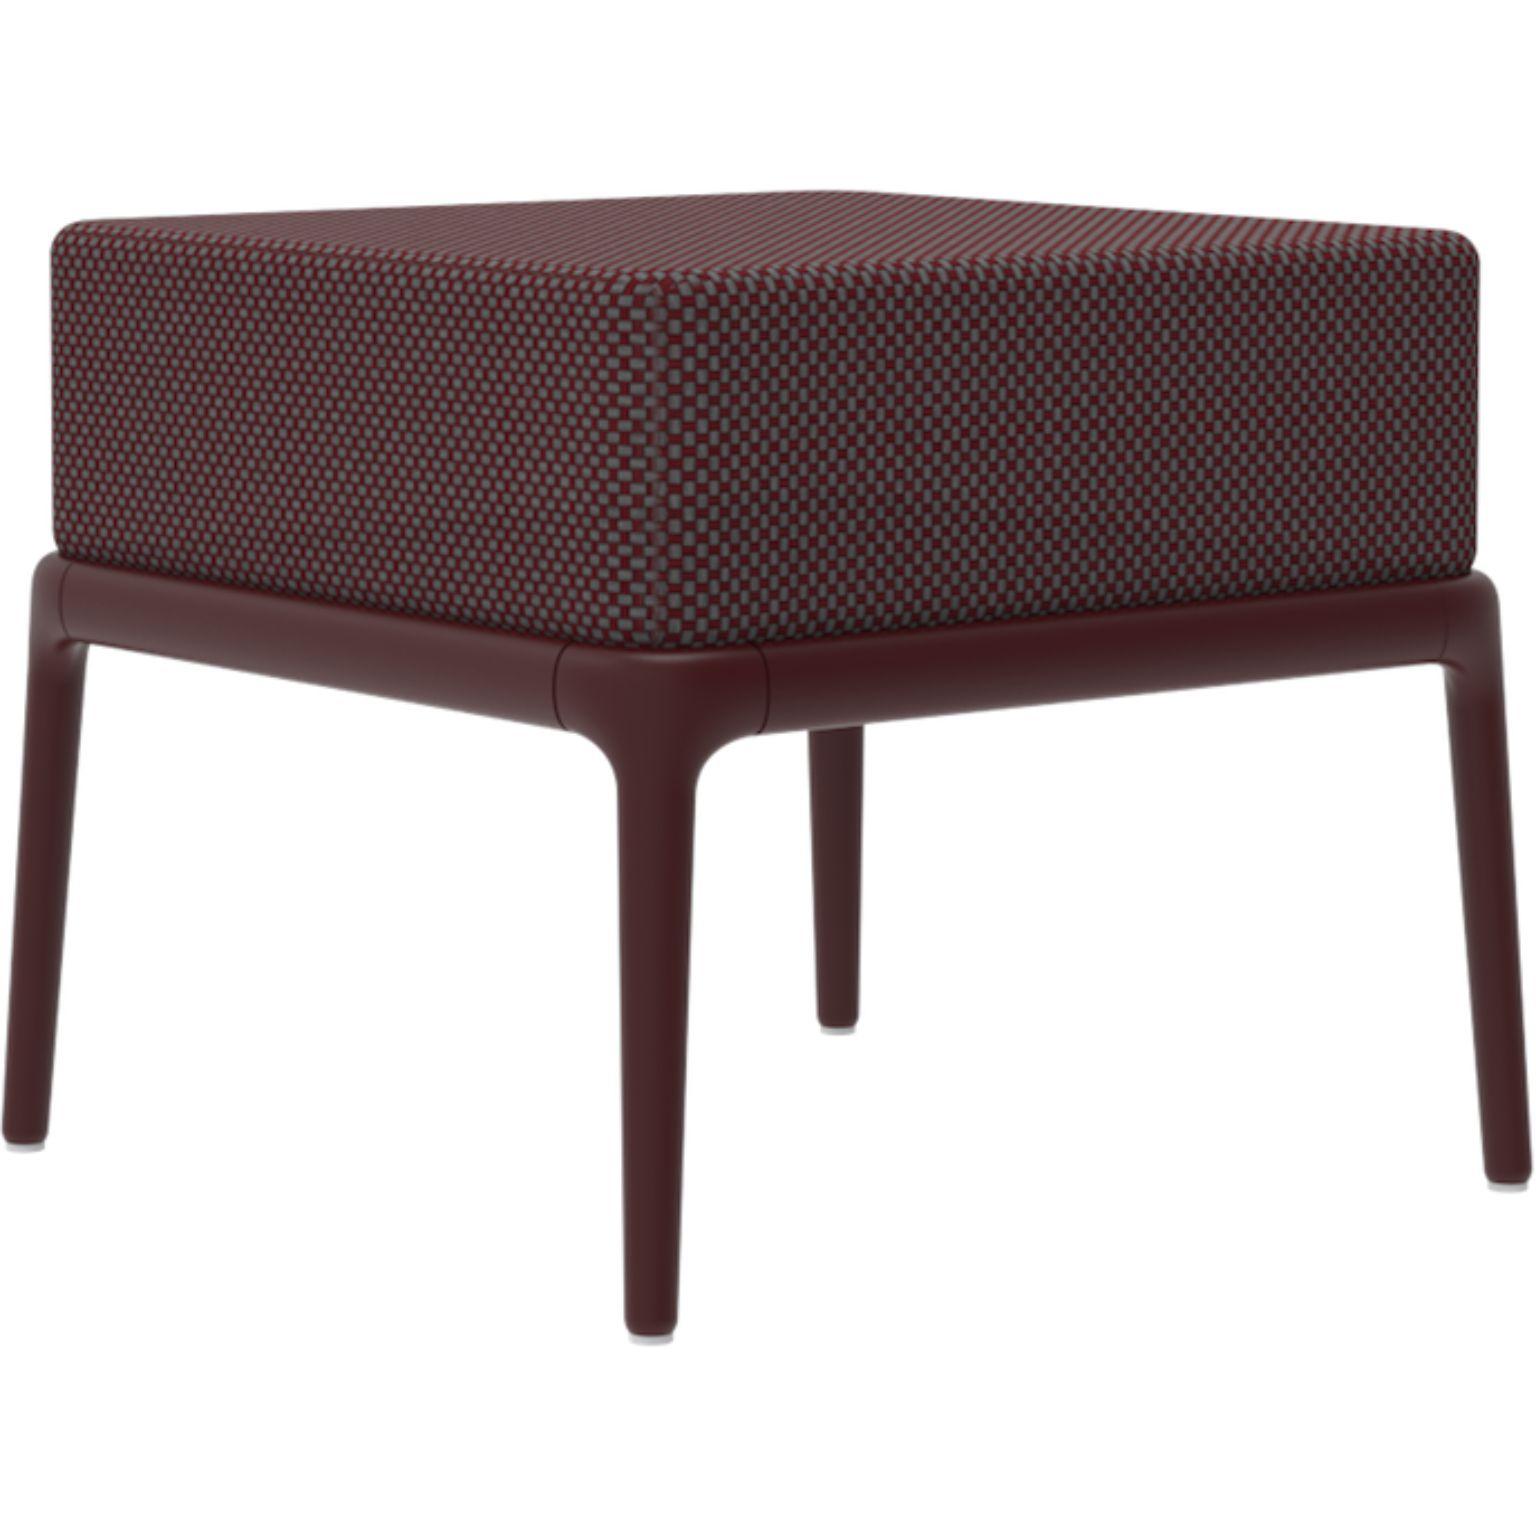 Xaloc burgundy pouf 50 by Mowee
Dimensions: D50 x W50 x H43 cm
Material: Aluminium, Textile
Weight: 7 kg
Also Available in different colours and finishes. 

 Xaloc synthesizes the lines of interior furniture to extrapolate to the exterior,